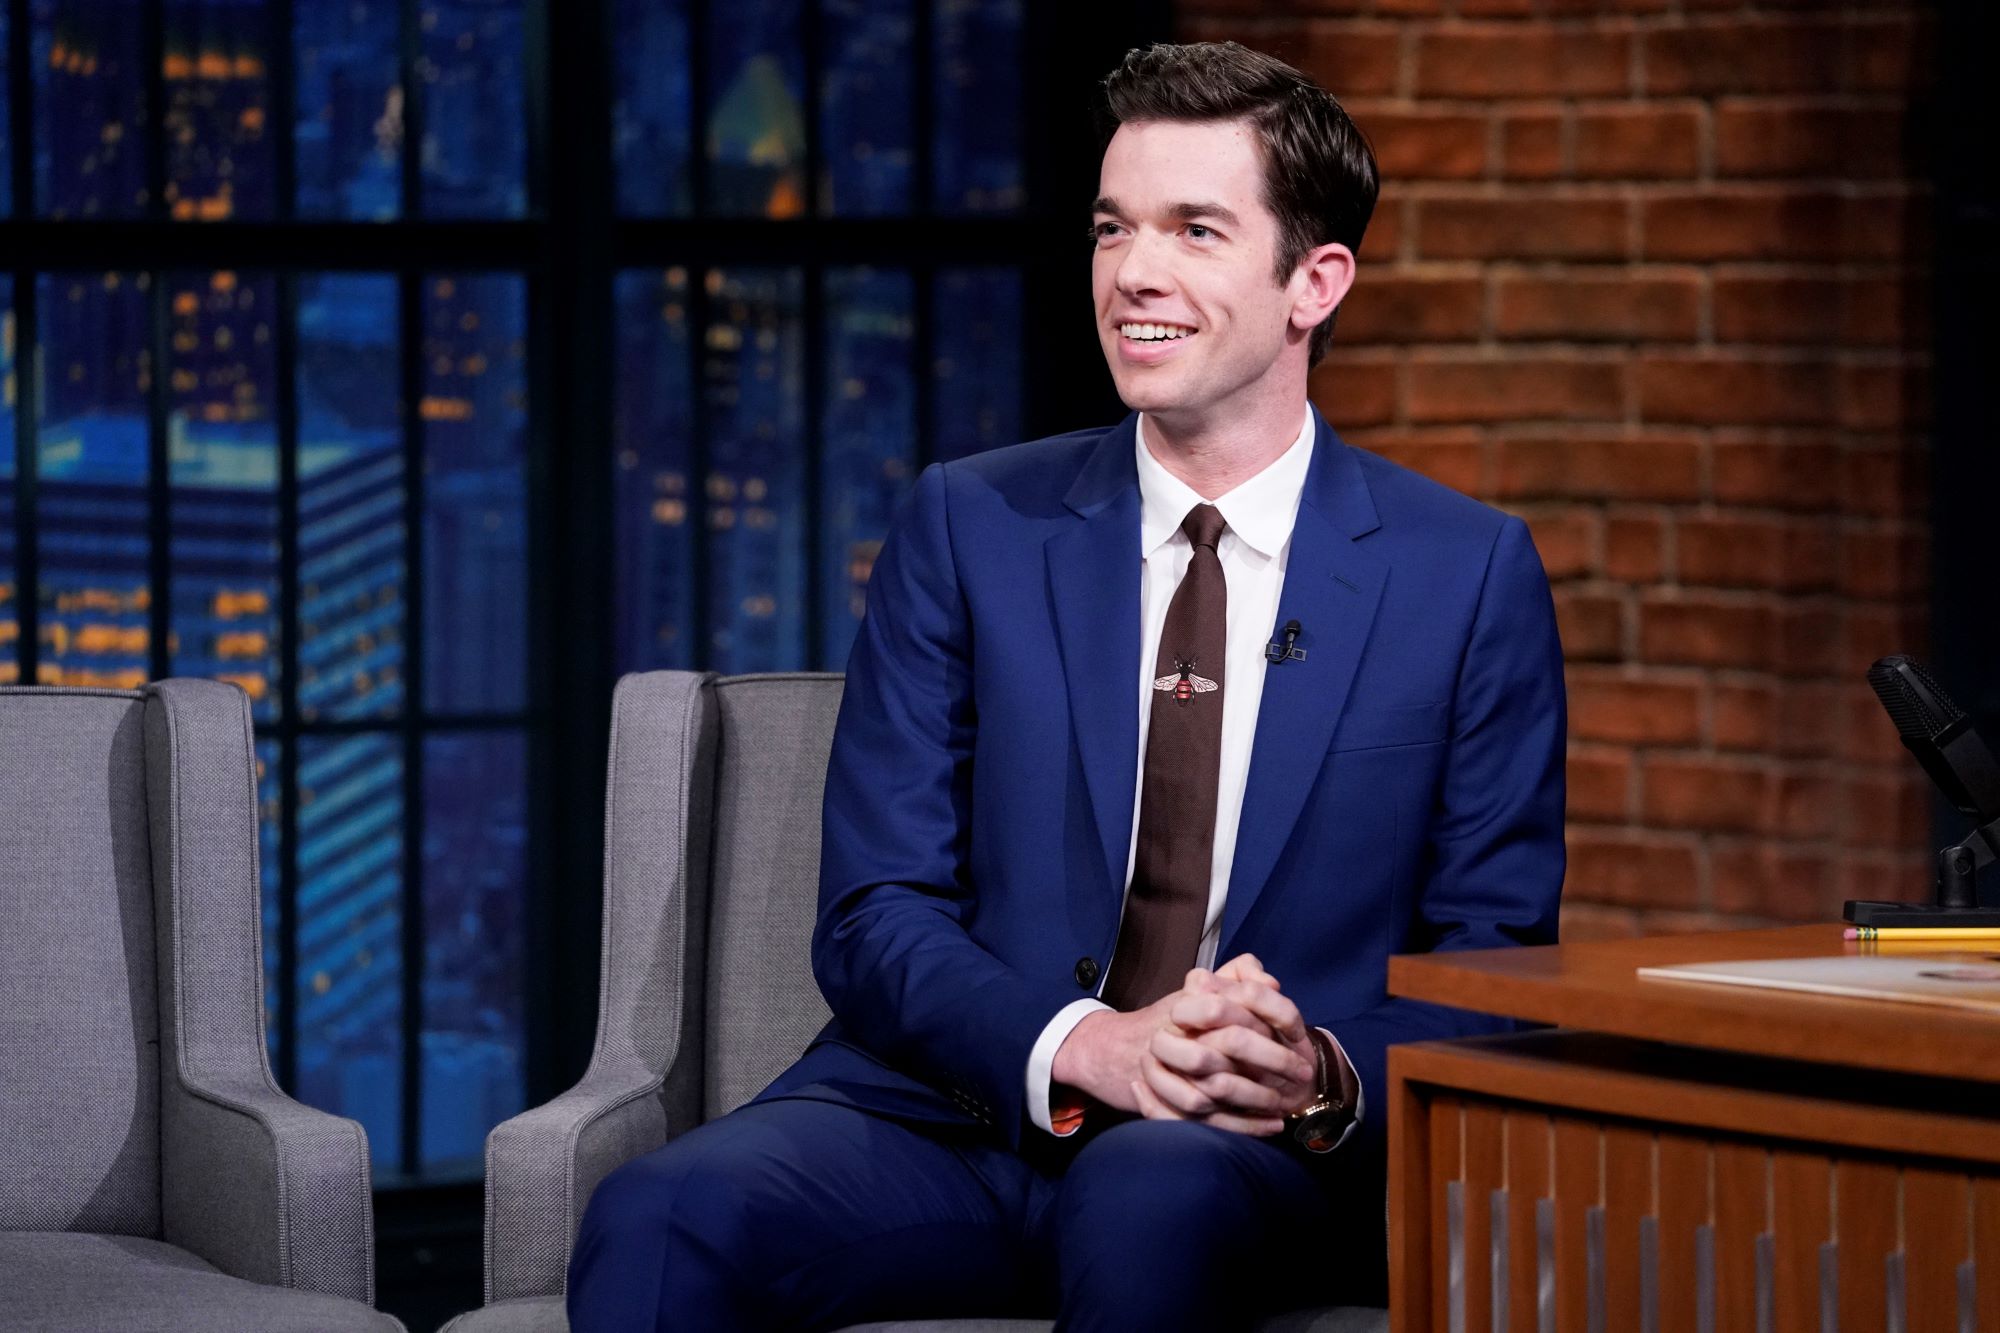 John Mulaney Talked About His Addiction and Revealed He Started